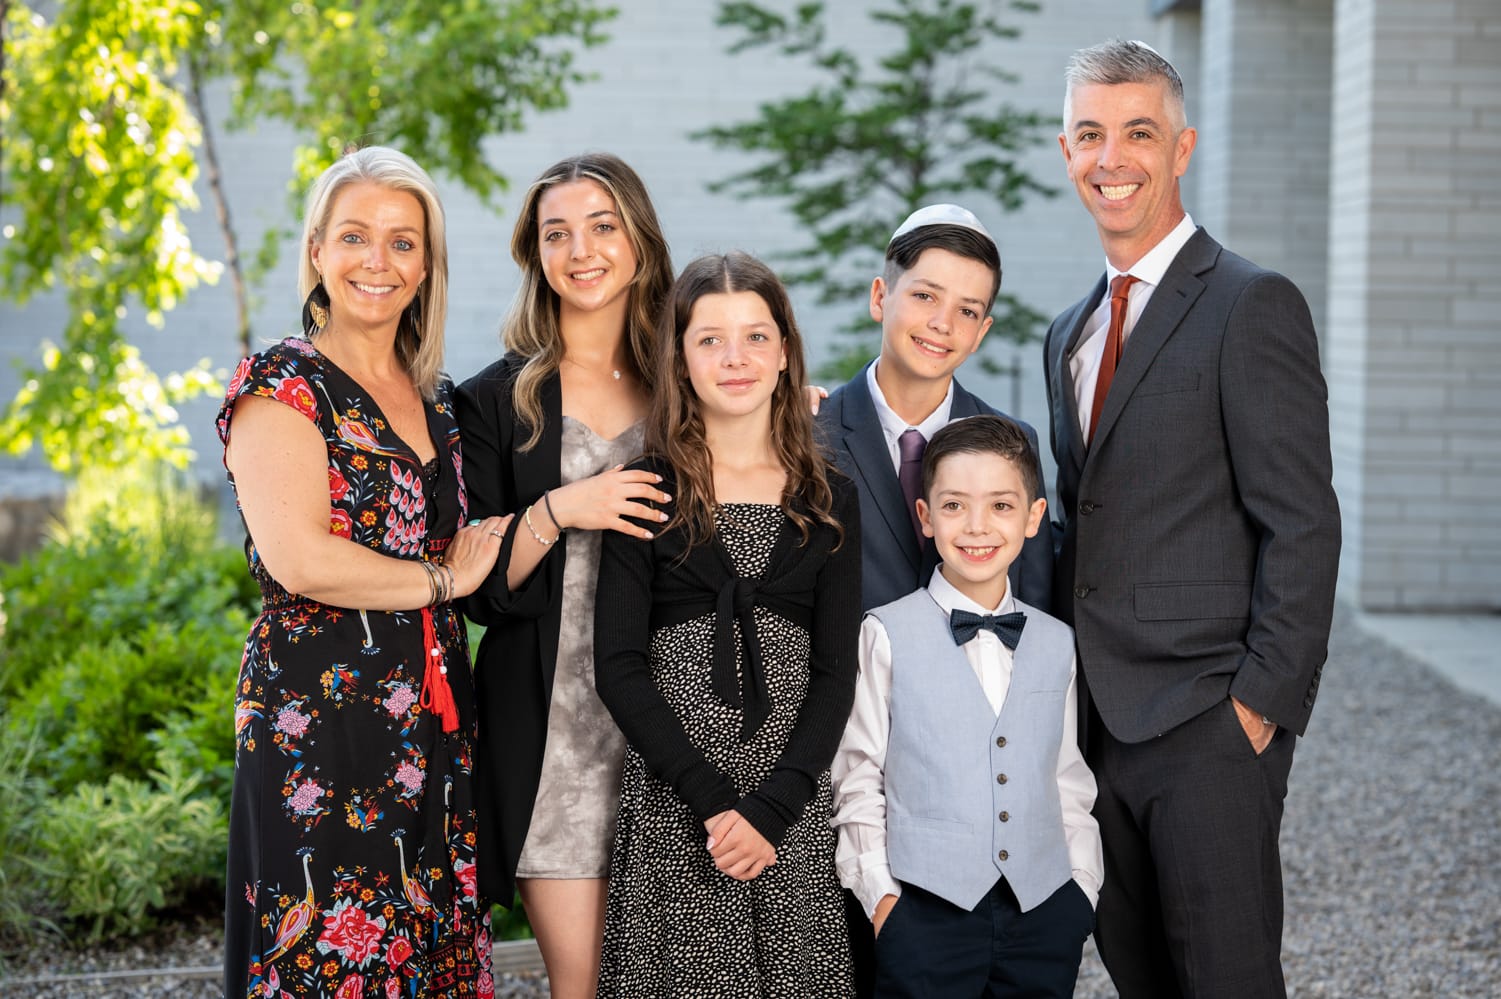 Bat mitzva girl with her her mother, father, sister and brothers smiling outside a grey synagogue